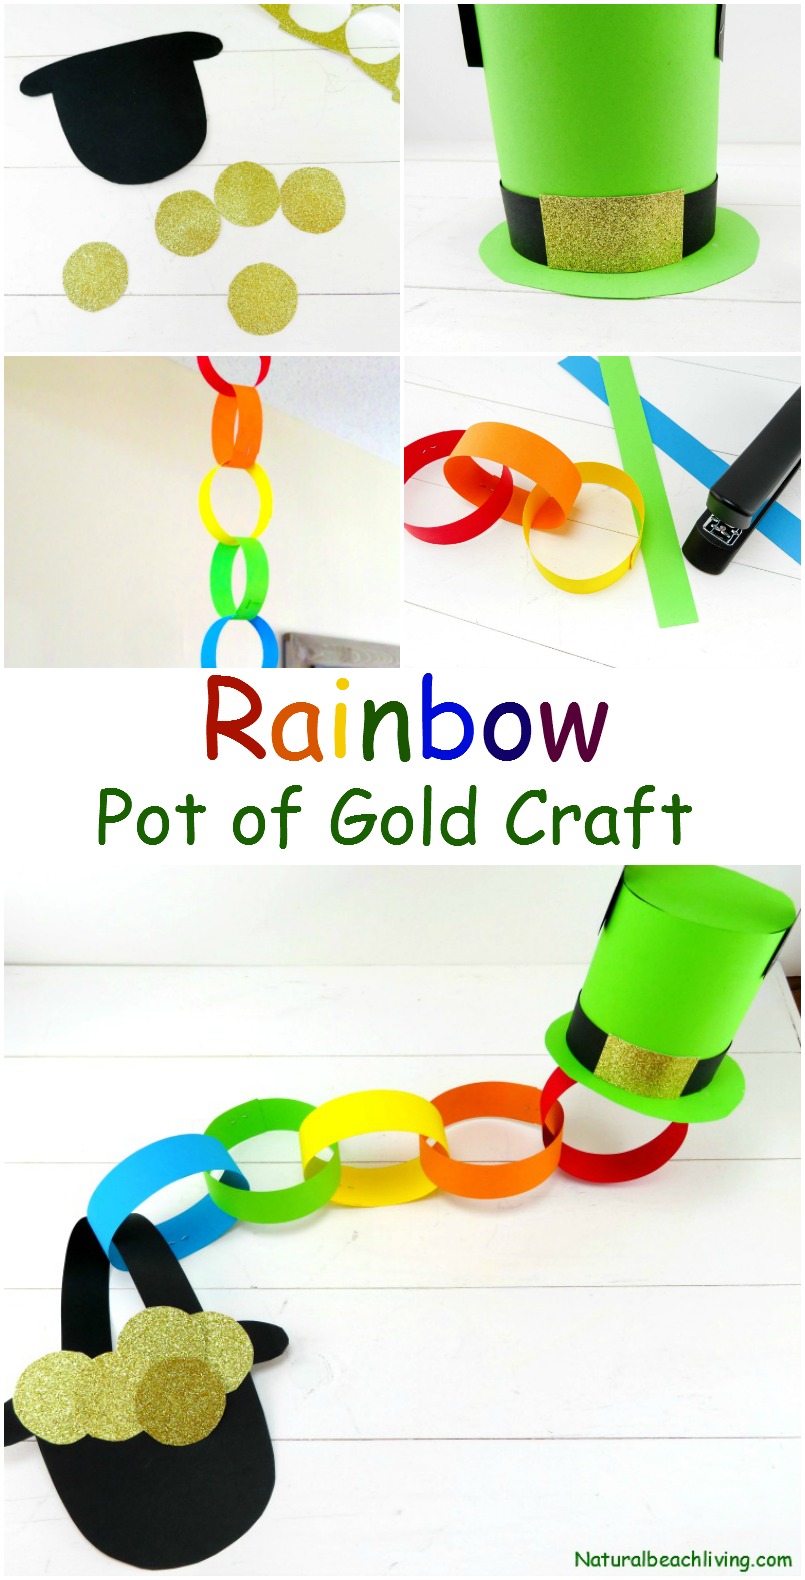 Rainbow Pot of Gold Craft Idea for St Patrick’s Day